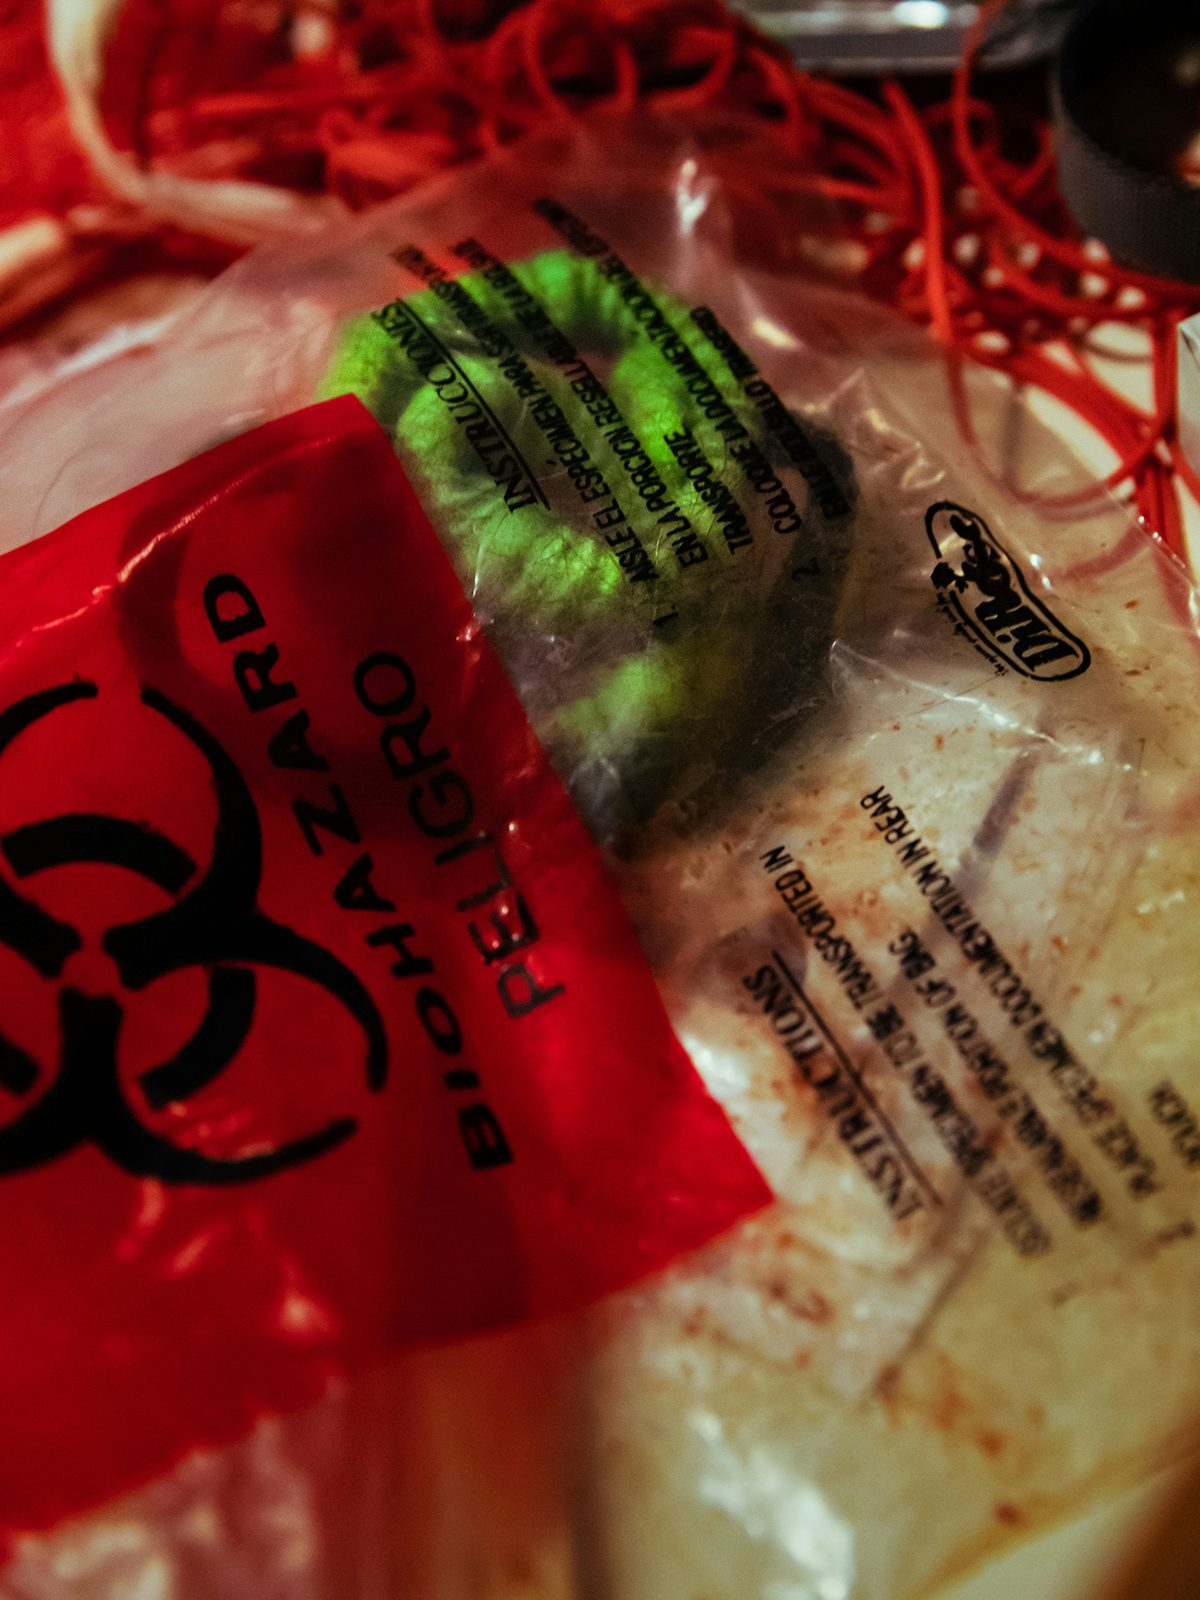 Image by Justin J Wee showing a biohazard bag in a drawer containing hair ties